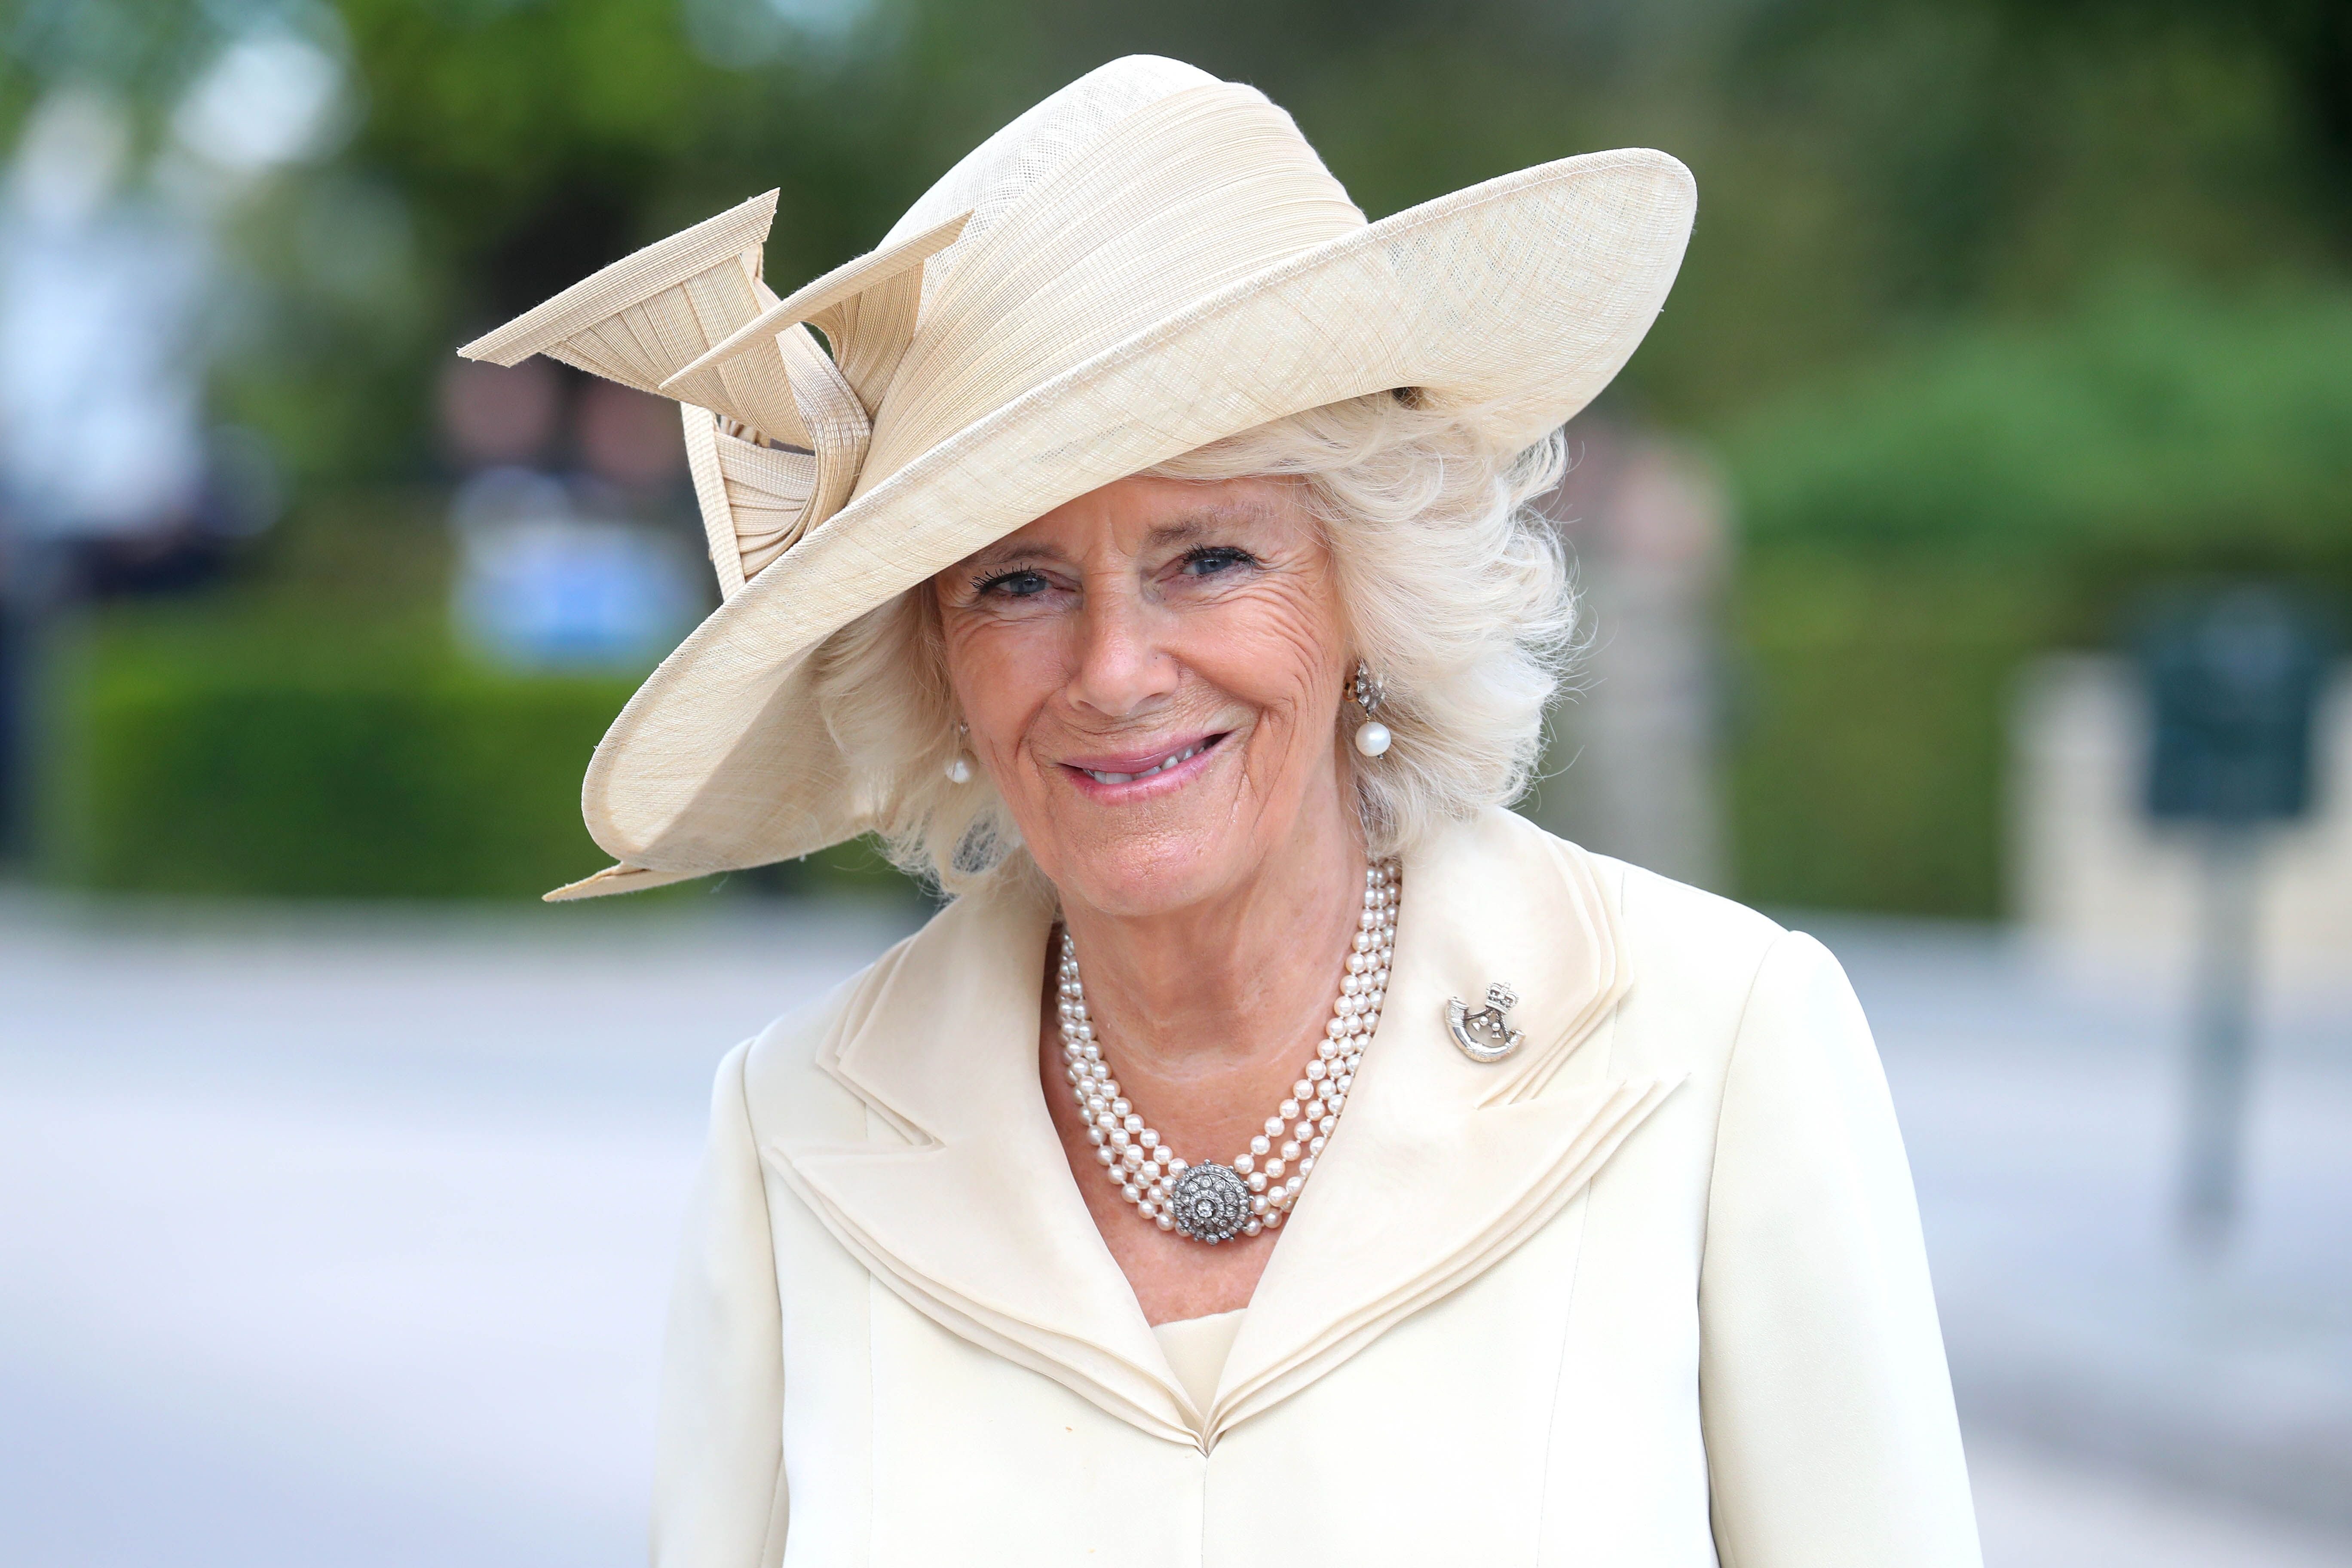 Camilla Parker-Bowles, Duchess of Cornwall in 2007 | Source: Getty Images